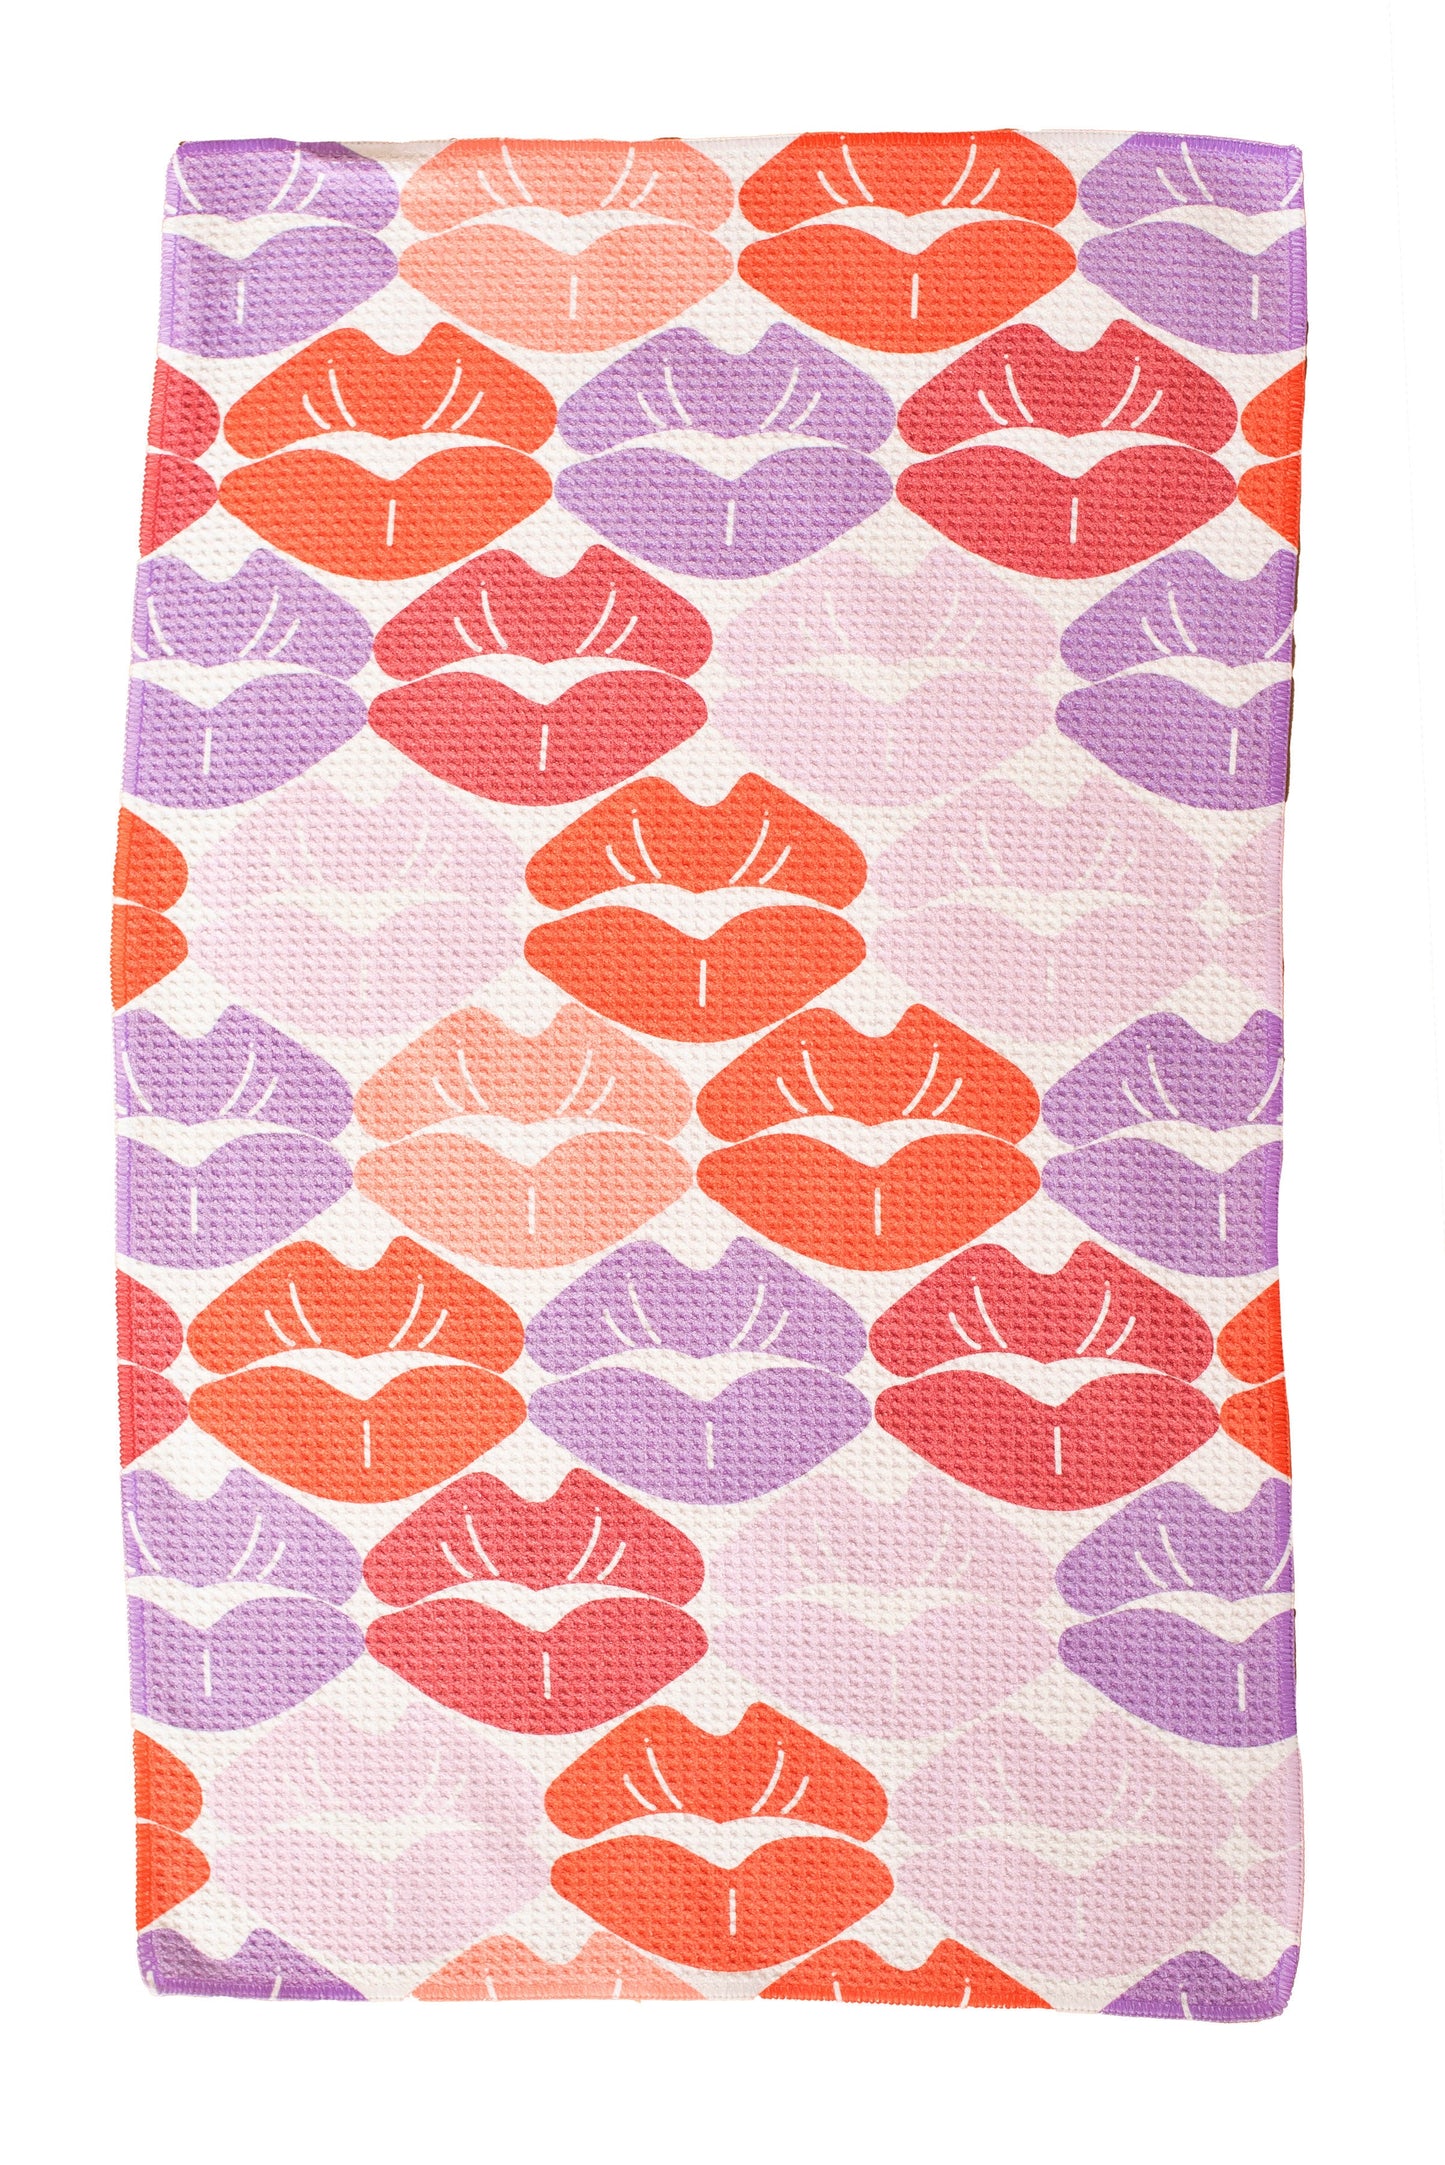 Lip Me For Free: Single-Sided Hand Towel